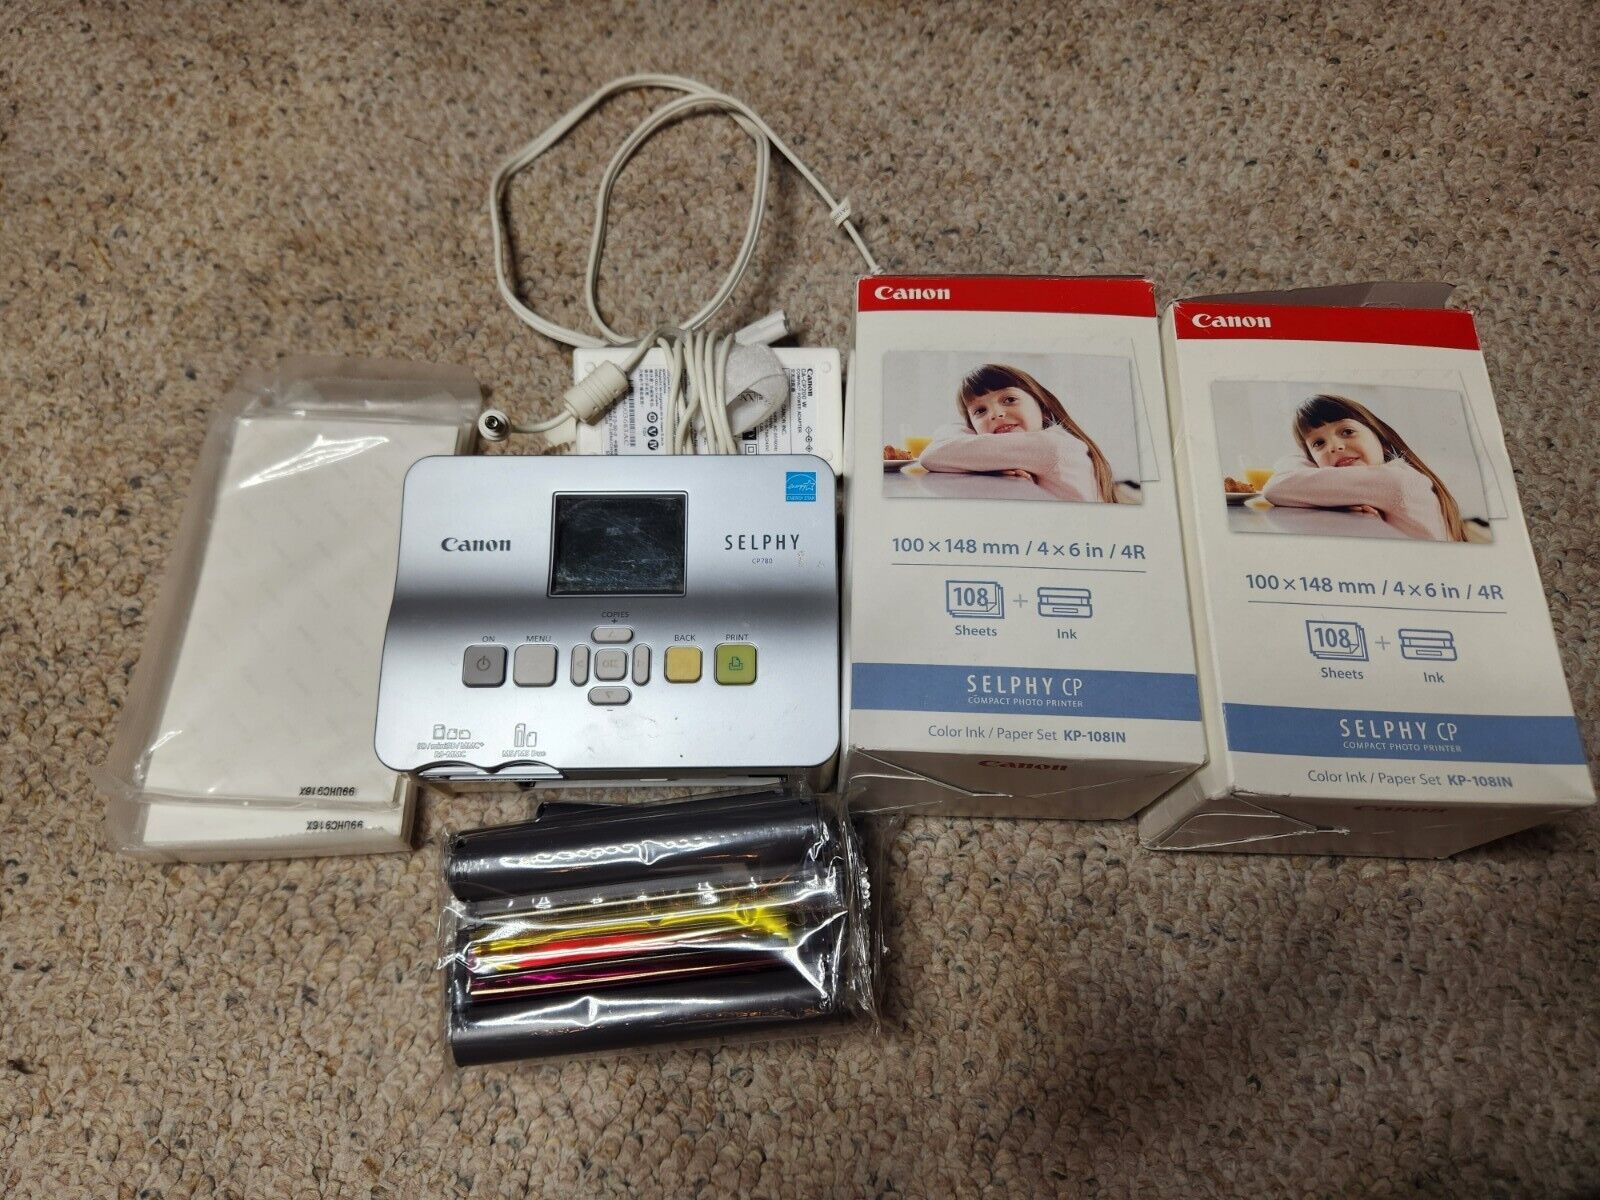 Canon SELPHY CP780 Compact Photo Printer & KP-108IN Color Ink/Paper Set